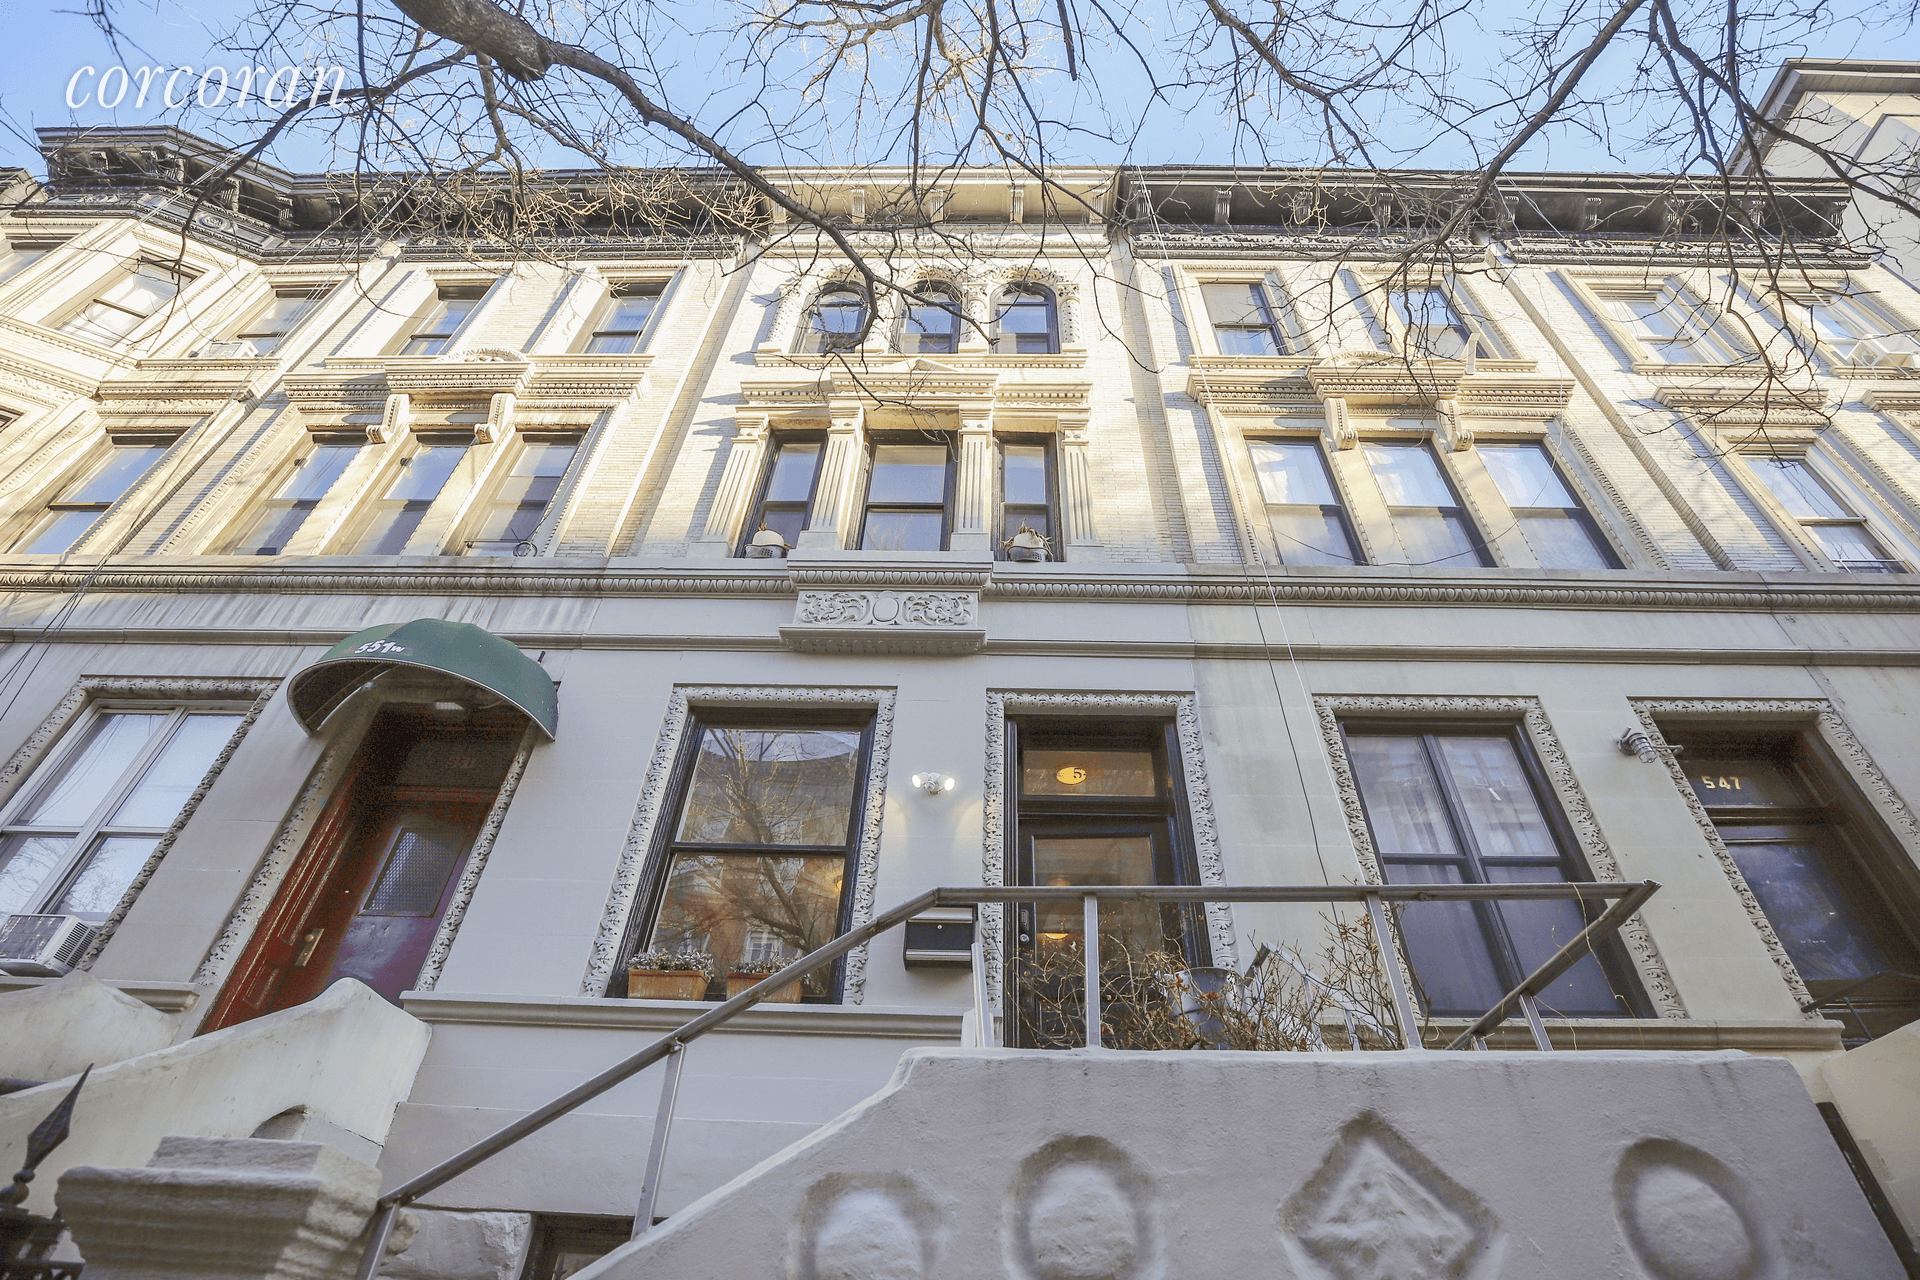 Welcome to 549 West 152nd street, this beautiful Two Family Townhouse has been magnificently preserved from when it was originally built in 1899.